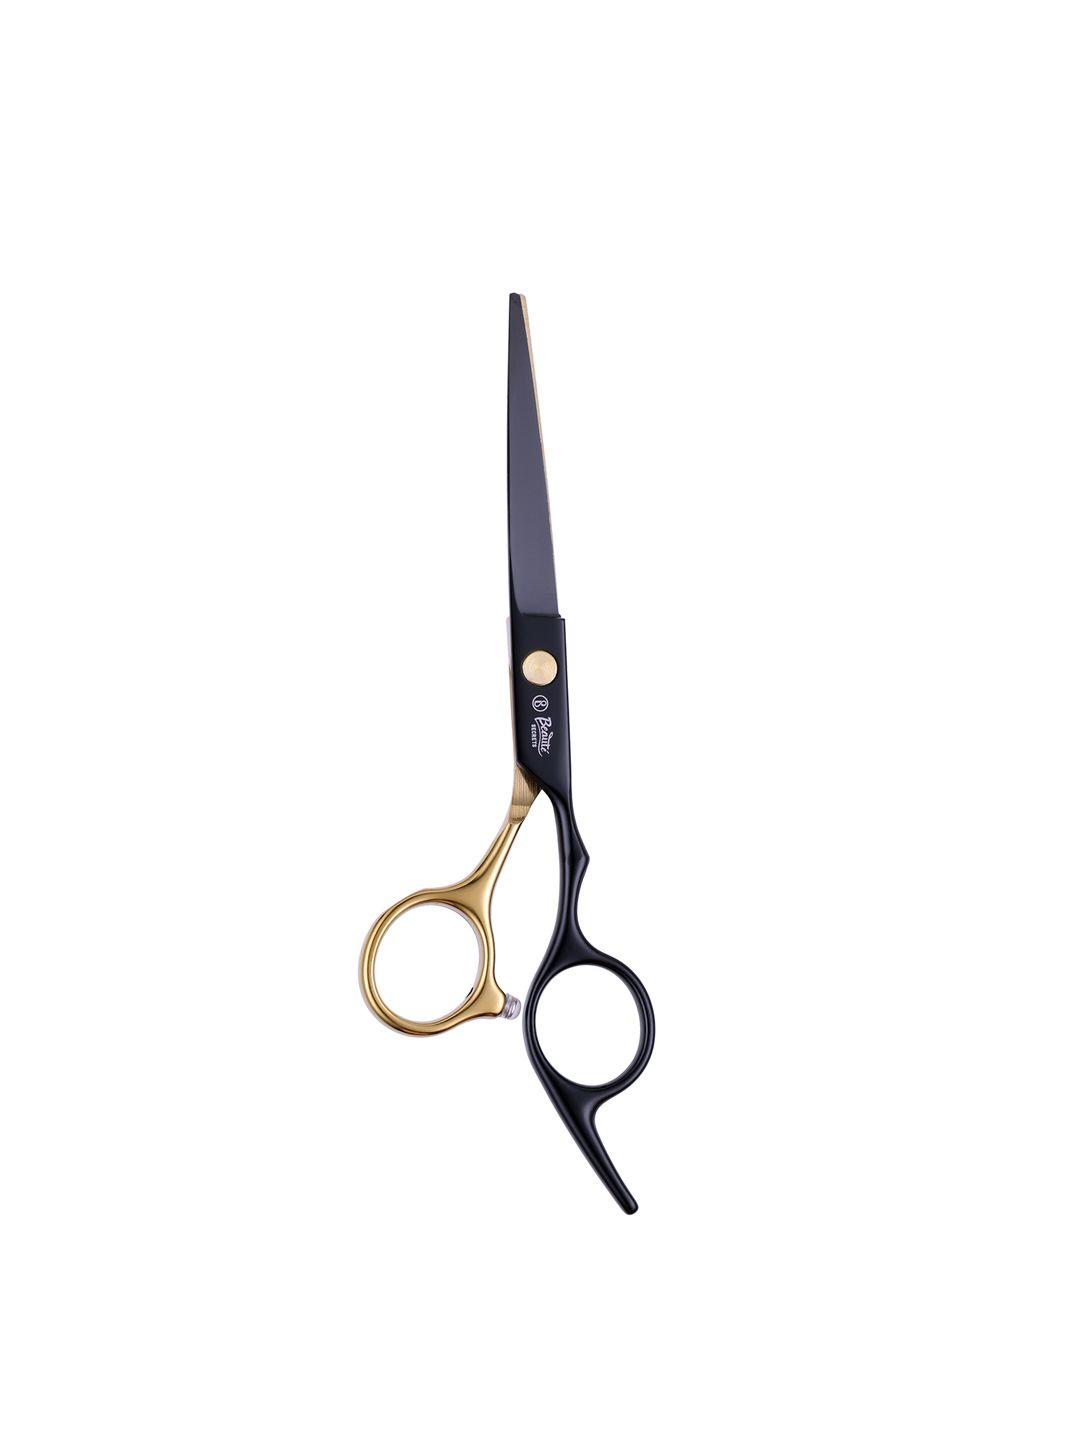 beaute secrets hair scissors with extremely sharp blades - black & gold-toned